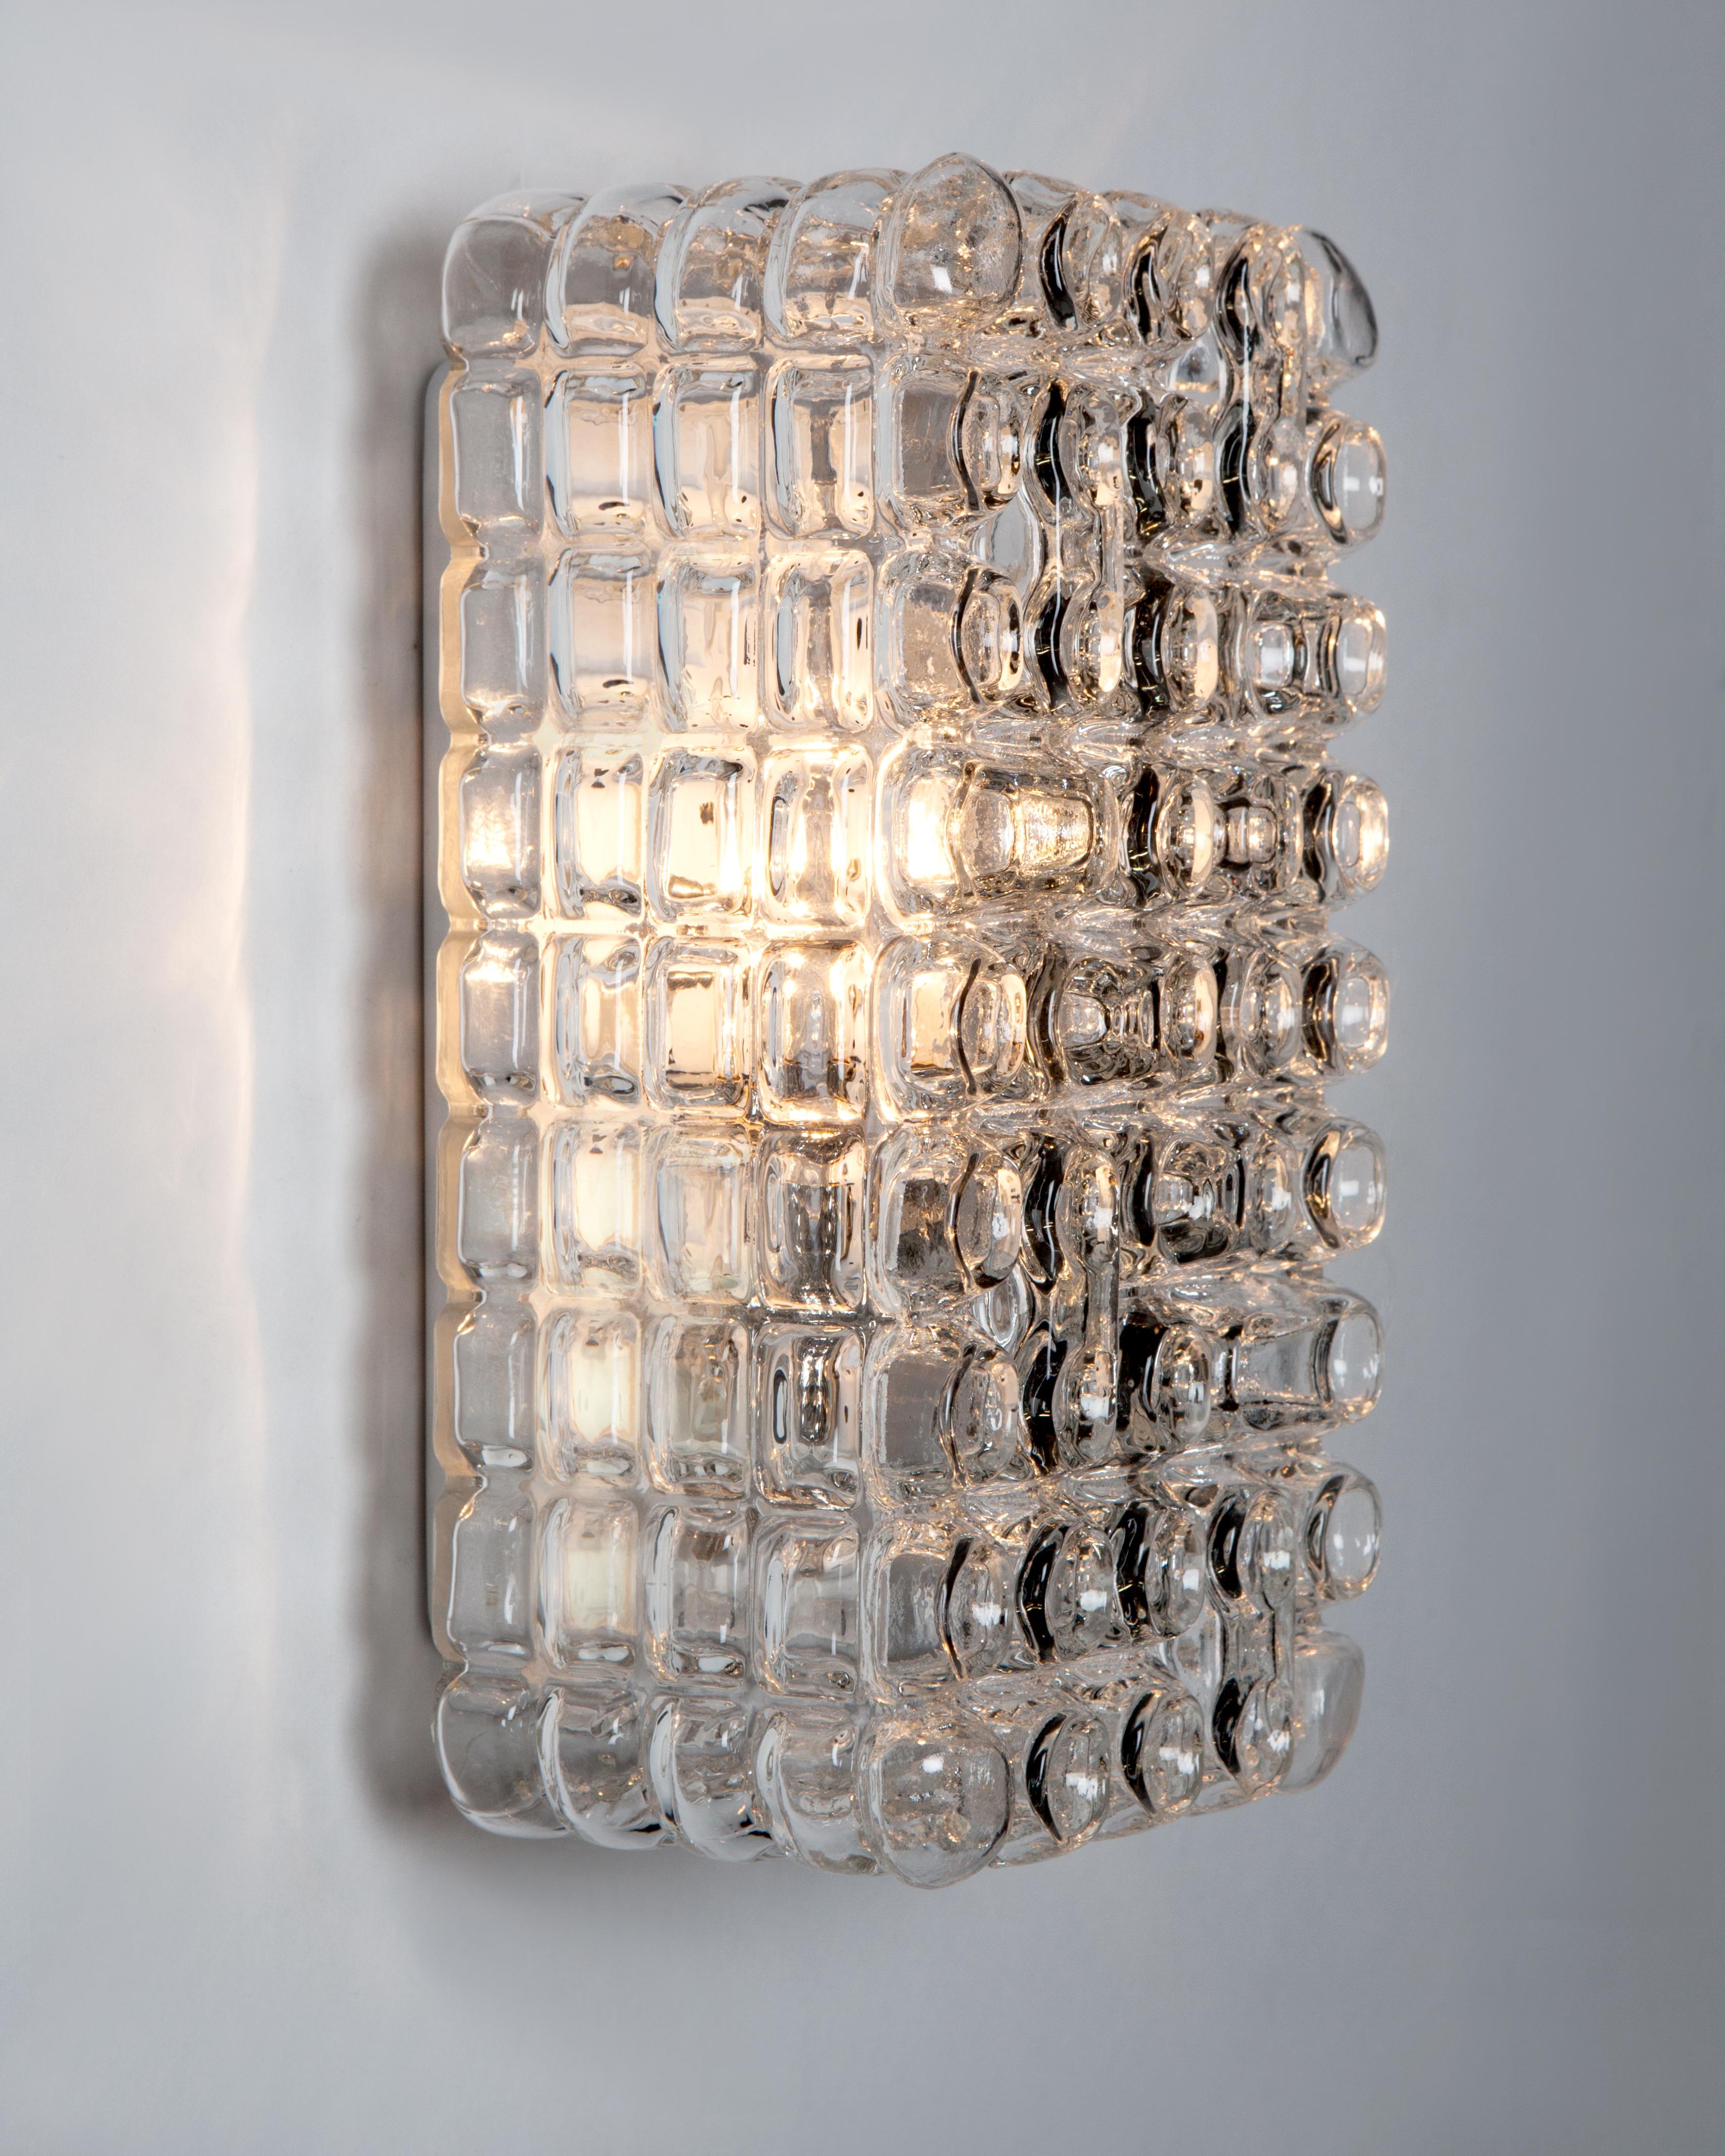 Painted Pair of Midcentury European Clear Rectangular Bubble Glass Sconces, Circa 1970s For Sale